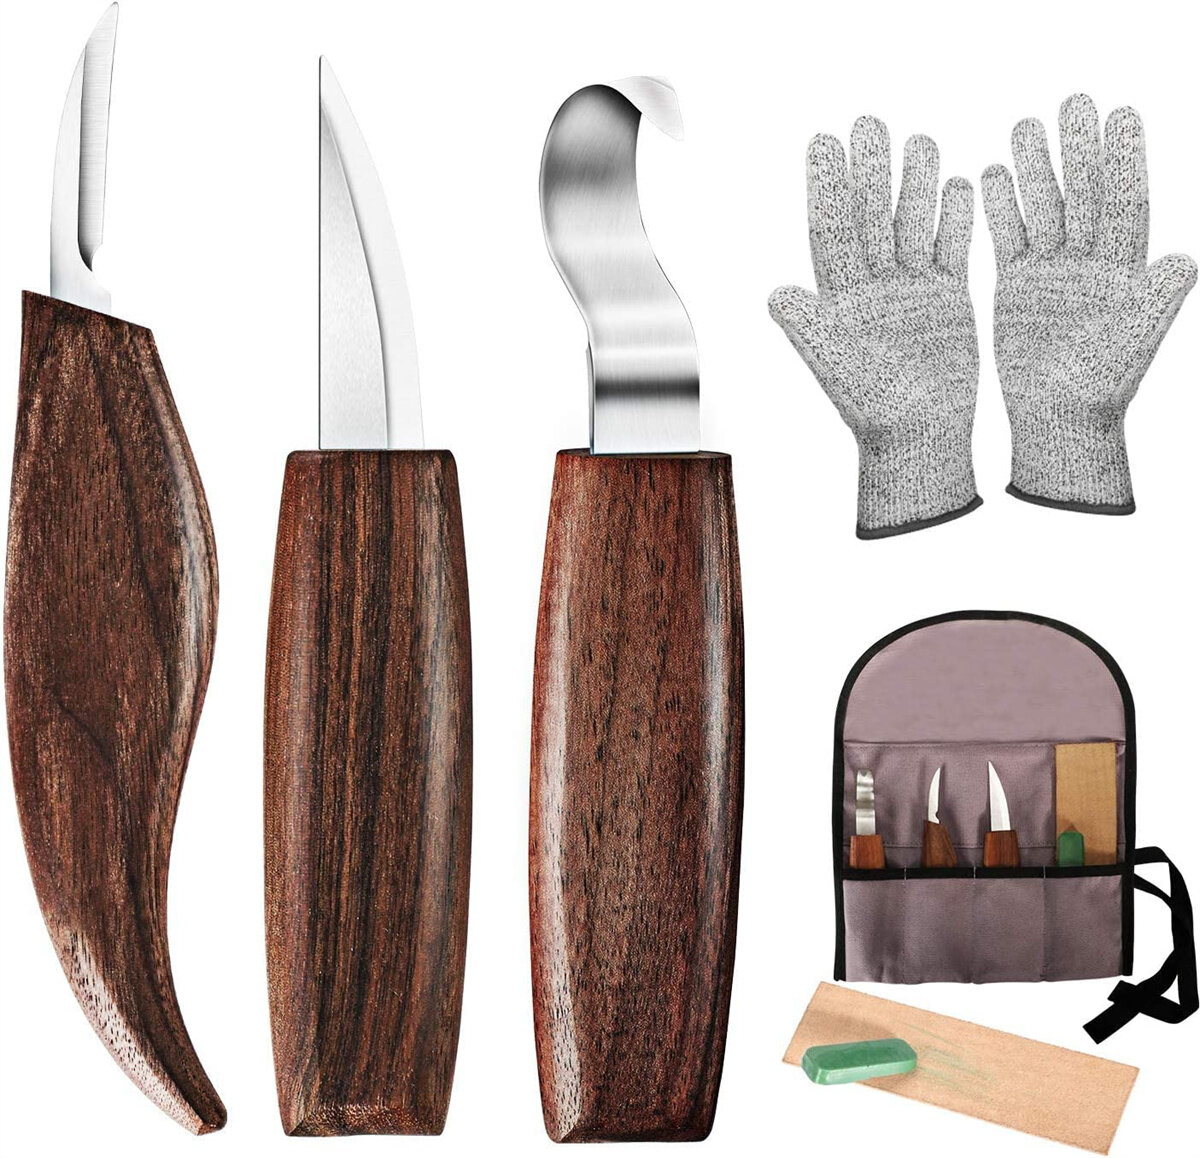 

7 in 1 Wood Carving Tools Kit with Carving Hook Knife Wood Whittling Knife Chip Carving Knife Gloves Carving Knife Sharp